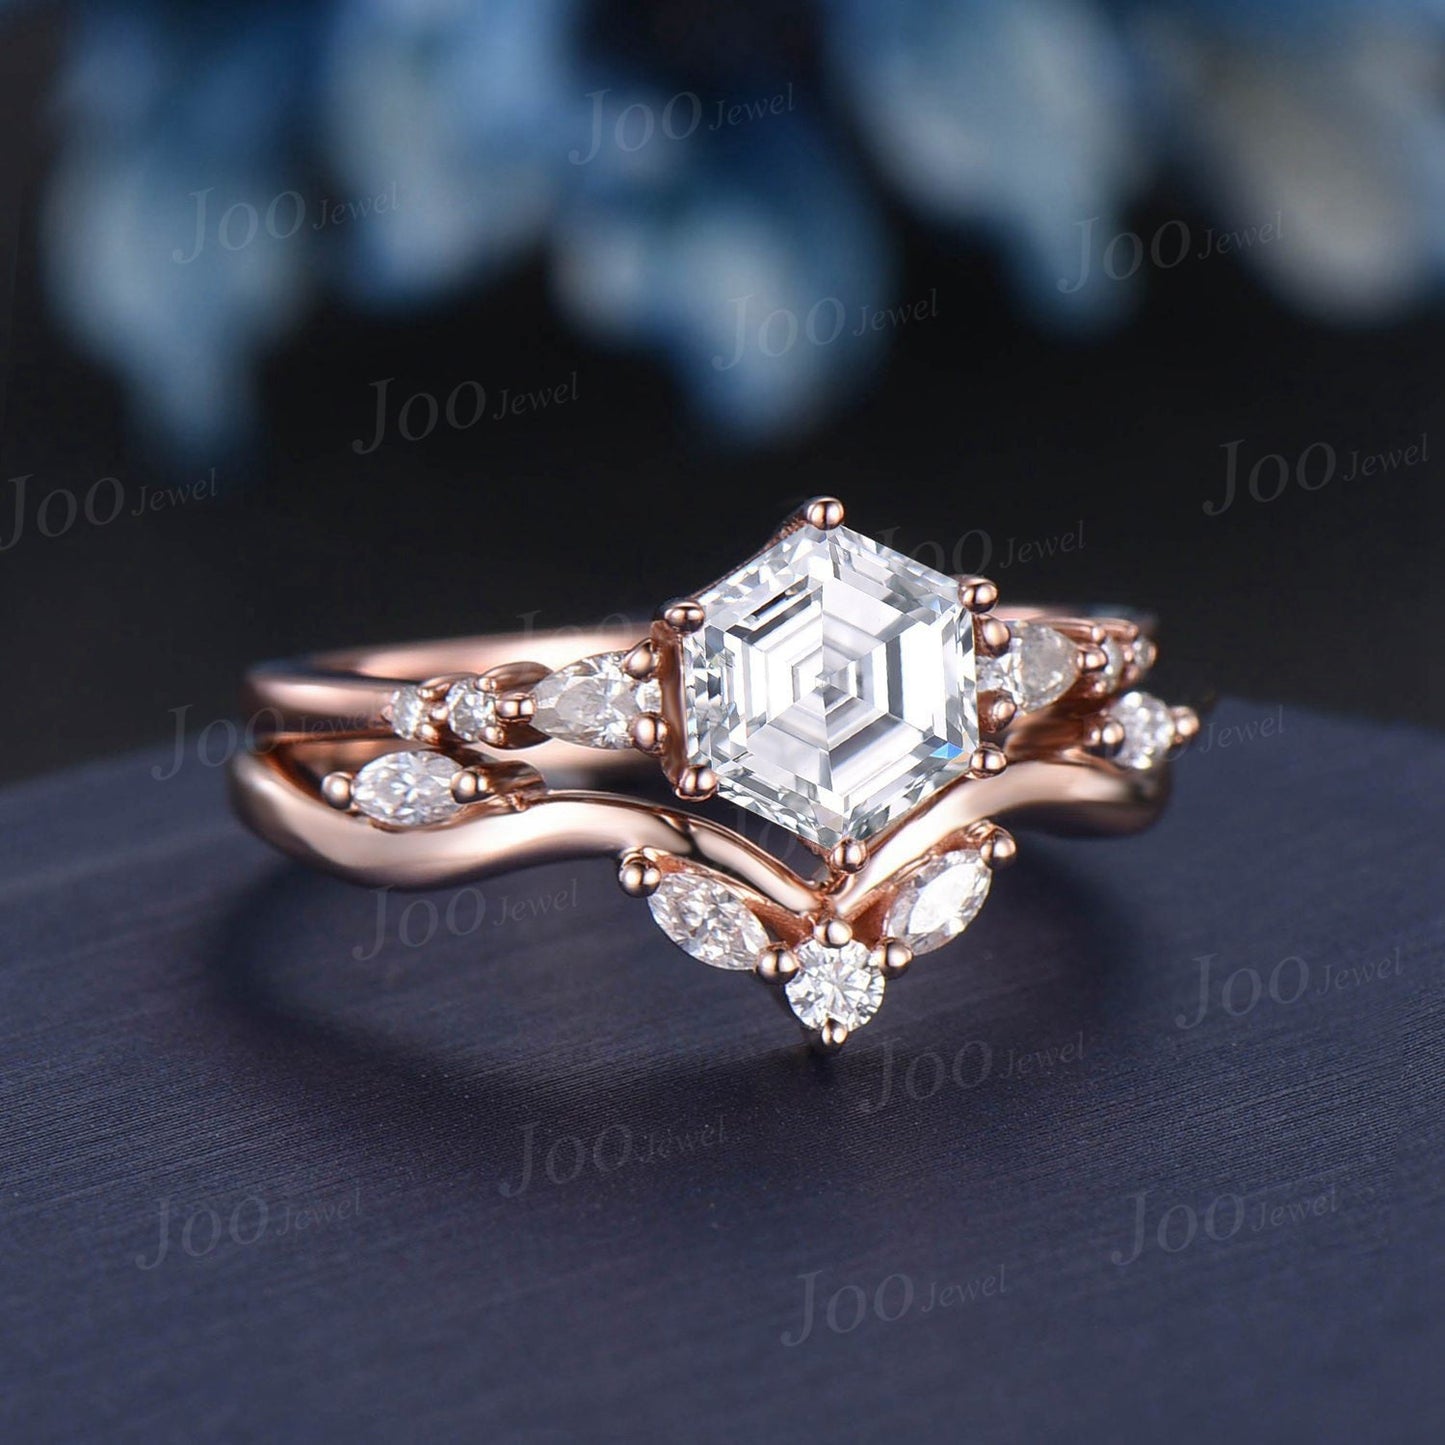 1ct Hexagon Cut Moissanite Diamond Engagement Ring Set Vintage Marquise Moissanite Curved Wedding Band Unique Moissanite Bridal Wedding Ring